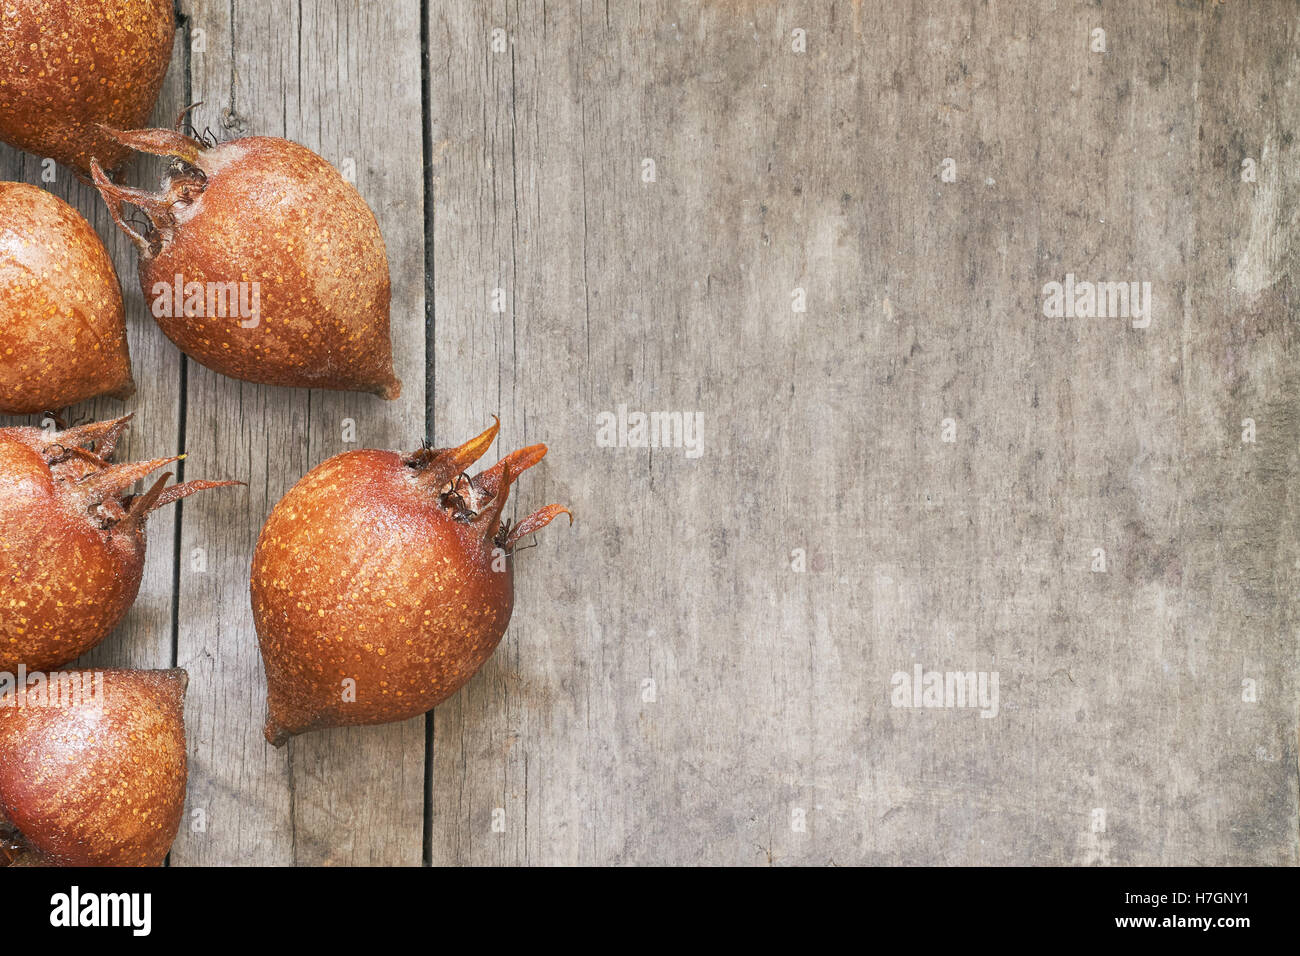 Common medlar fruit (mispel) on grey rustic wooden background. Top view with plenty of copy space Stock Photo